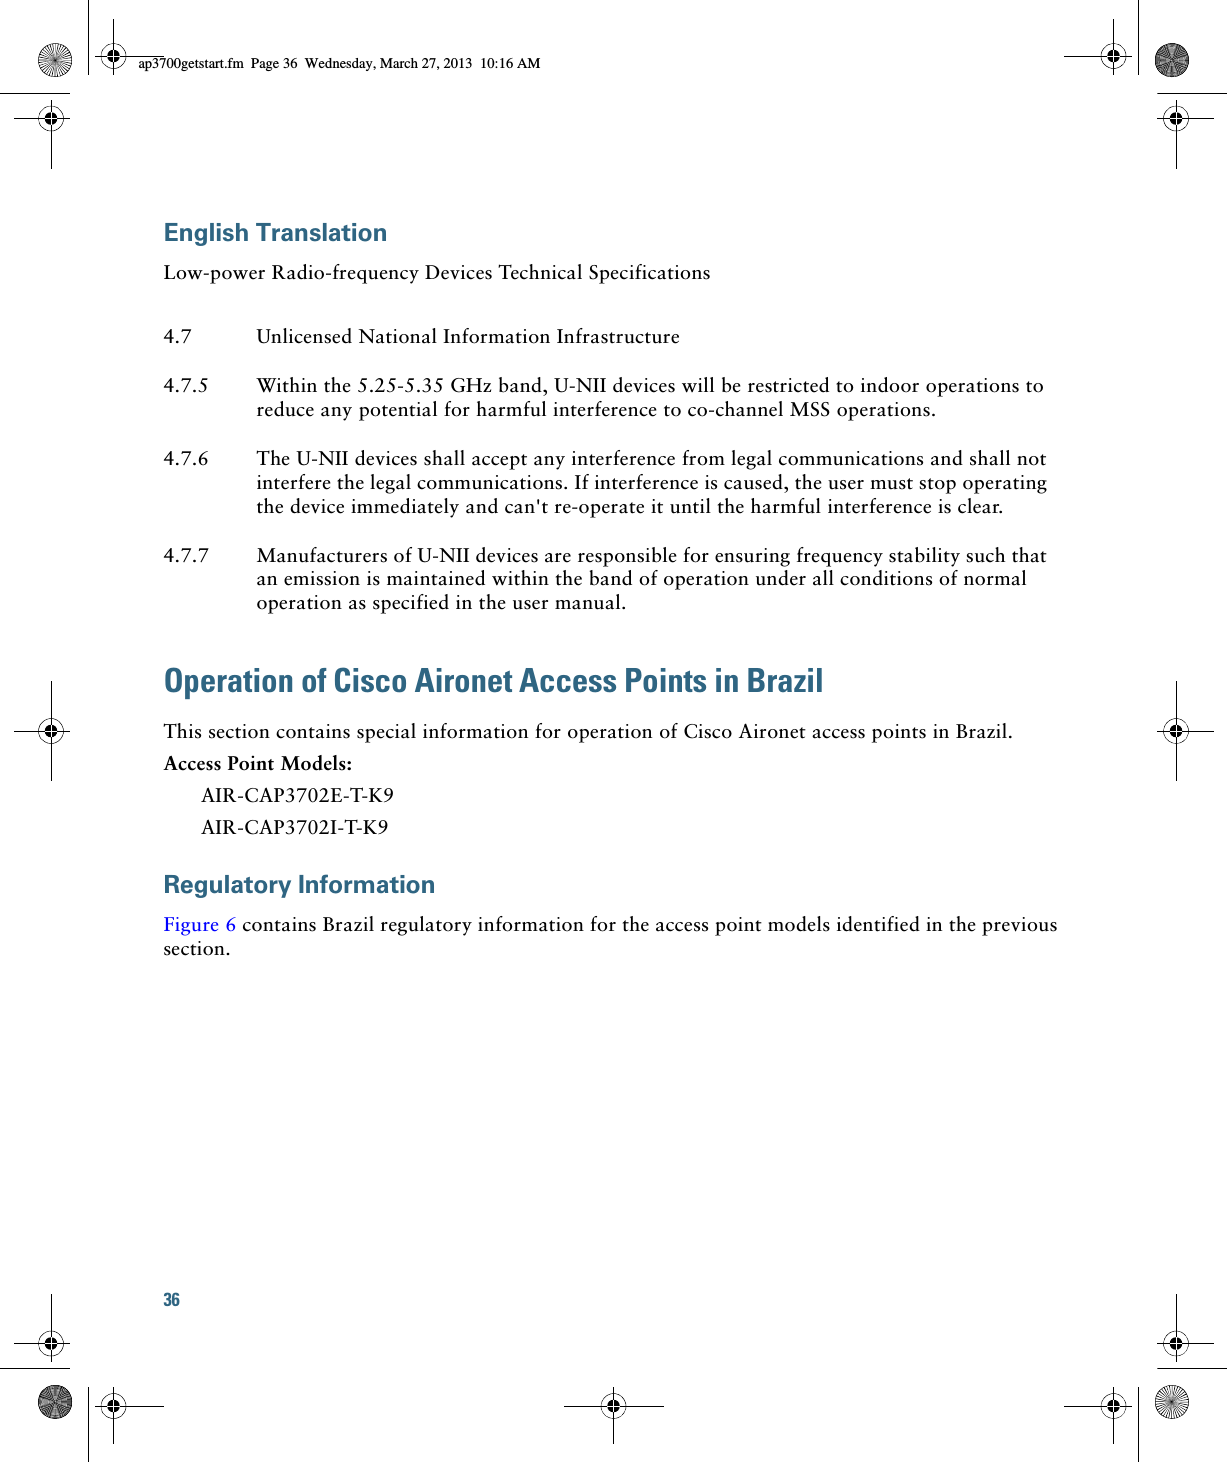 36 English TranslationLow-power Radio-frequency Devices Technical SpecificationsOperation of Cisco Aironet Access Points in BrazilThis section contains special information for operation of Cisco Aironet access points in Brazil.Access Point Models:AIR-CAP3702E-T-K9AIR-CAP3702I-T-K9Regulatory InformationFigure 6 contains Brazil regulatory information for the access point models identified in the previous section.4.7 Unlicensed National Information Infrastructure4.7.5 Within the 5.25-5.35 GHz band, U-NII devices will be restricted to indoor operations to reduce any potential for harmful interference to co-channel MSS operations.4.7.6 The U-NII devices shall accept any interference from legal communications and shall not interfere the legal communications. If interference is caused, the user must stop operating the device immediately and can&apos;t re-operate it until the harmful interference is clear.4.7.7 Manufacturers of U-NII devices are responsible for ensuring frequency stability such that an emission is maintained within the band of operation under all conditions of normal operation as specified in the user manual.ap3700getstart.fm  Page 36  Wednesday, March 27, 2013  10:16 AM